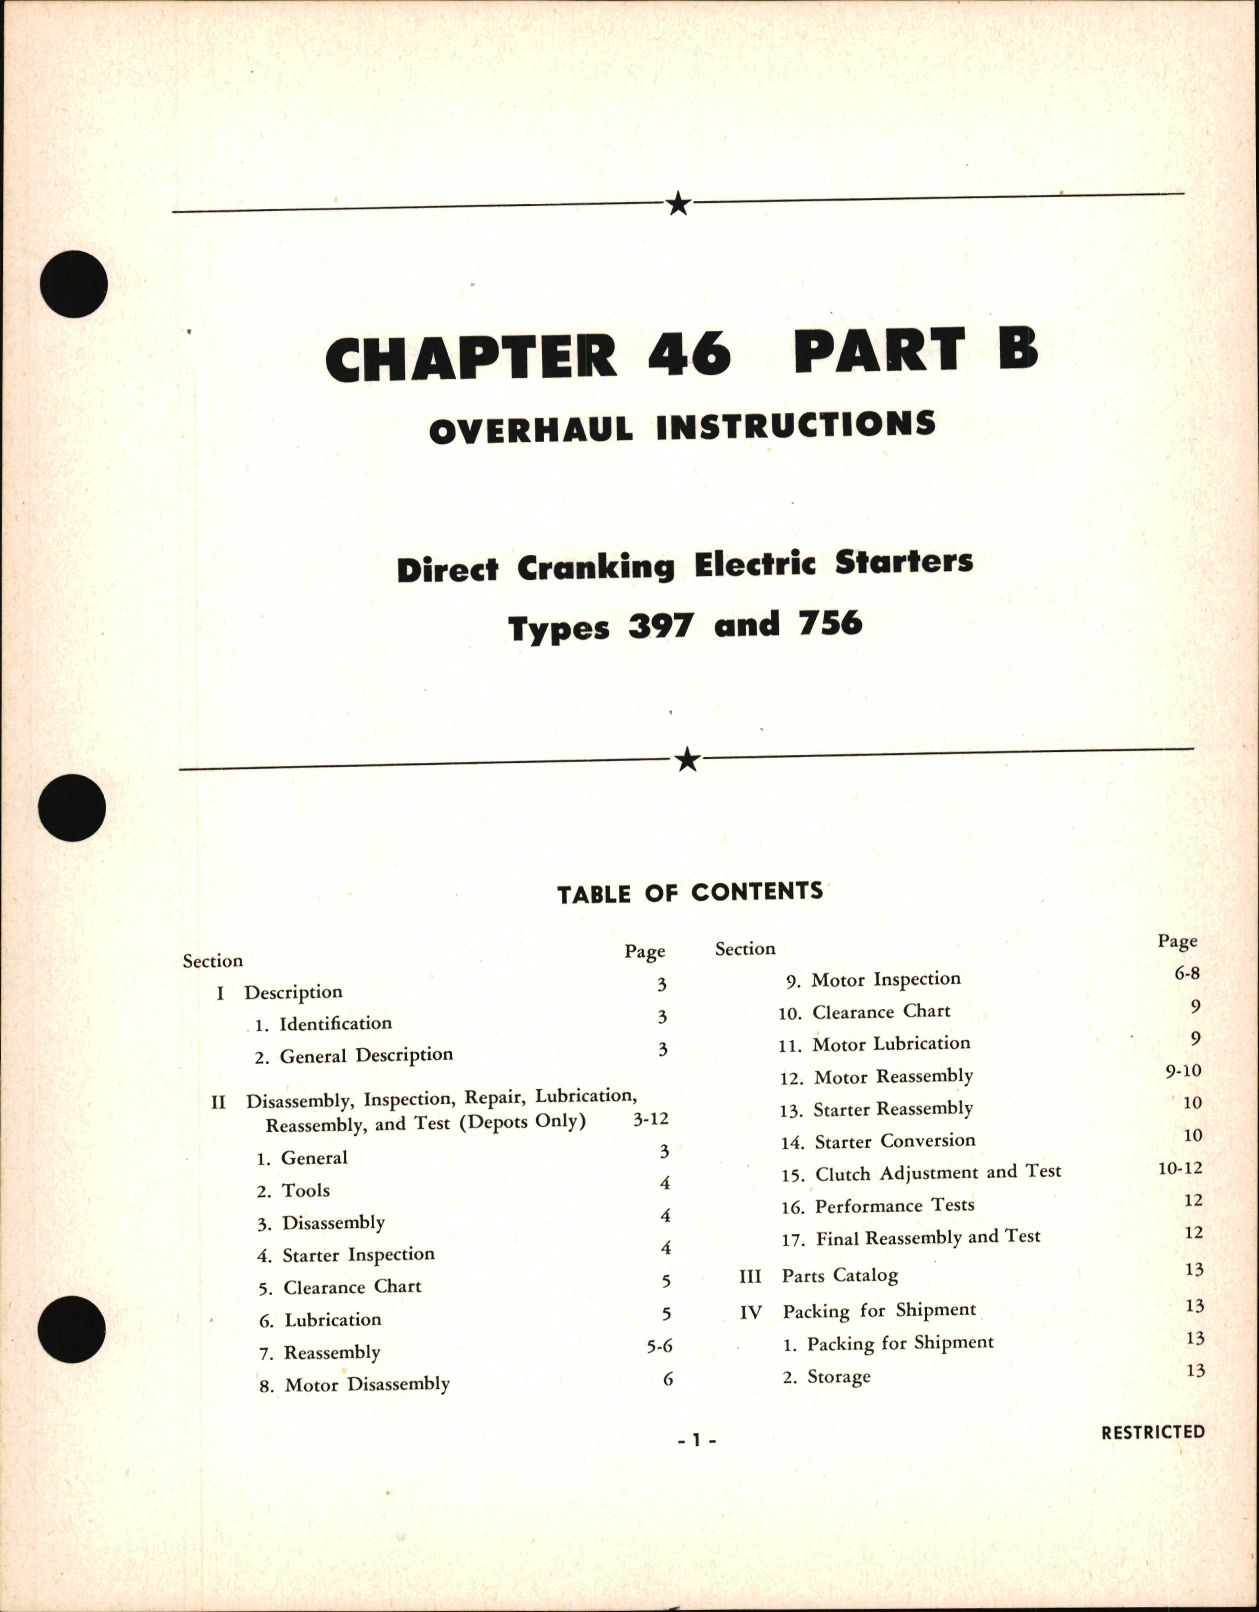 Sample page 1 from AirCorps Library document: Overhaul Instructions for Direct Cranking Electric Starters, Chapter 46 Part B